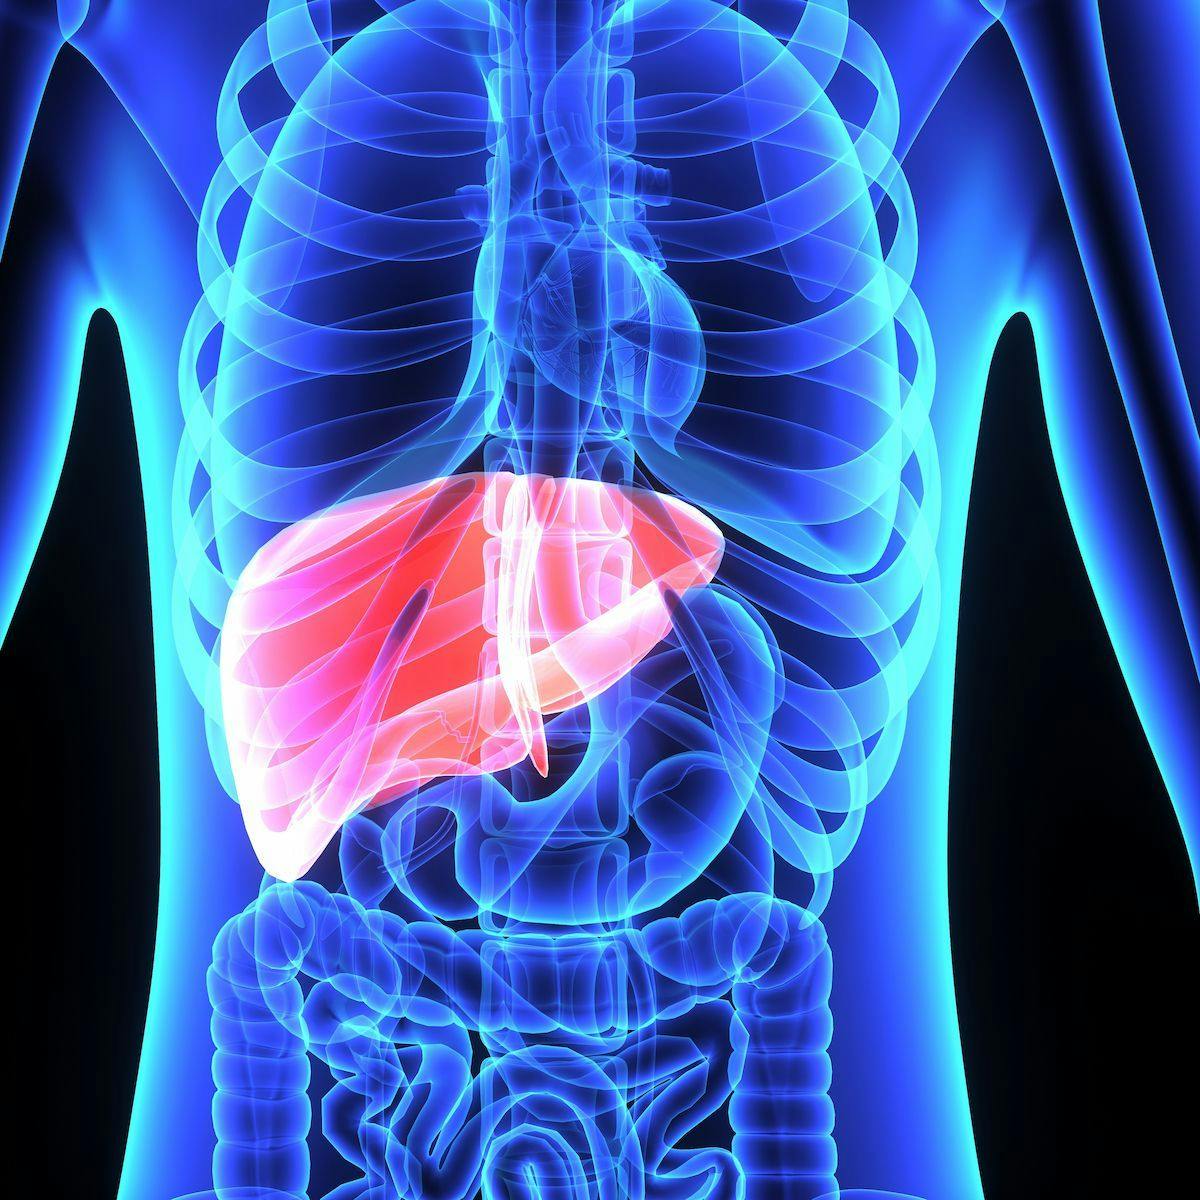 Patients with unresectable hepatocellular carcinoma receiving single tremelimumab regular interval durvalumab had a feasible immune-related adverse effect profile.